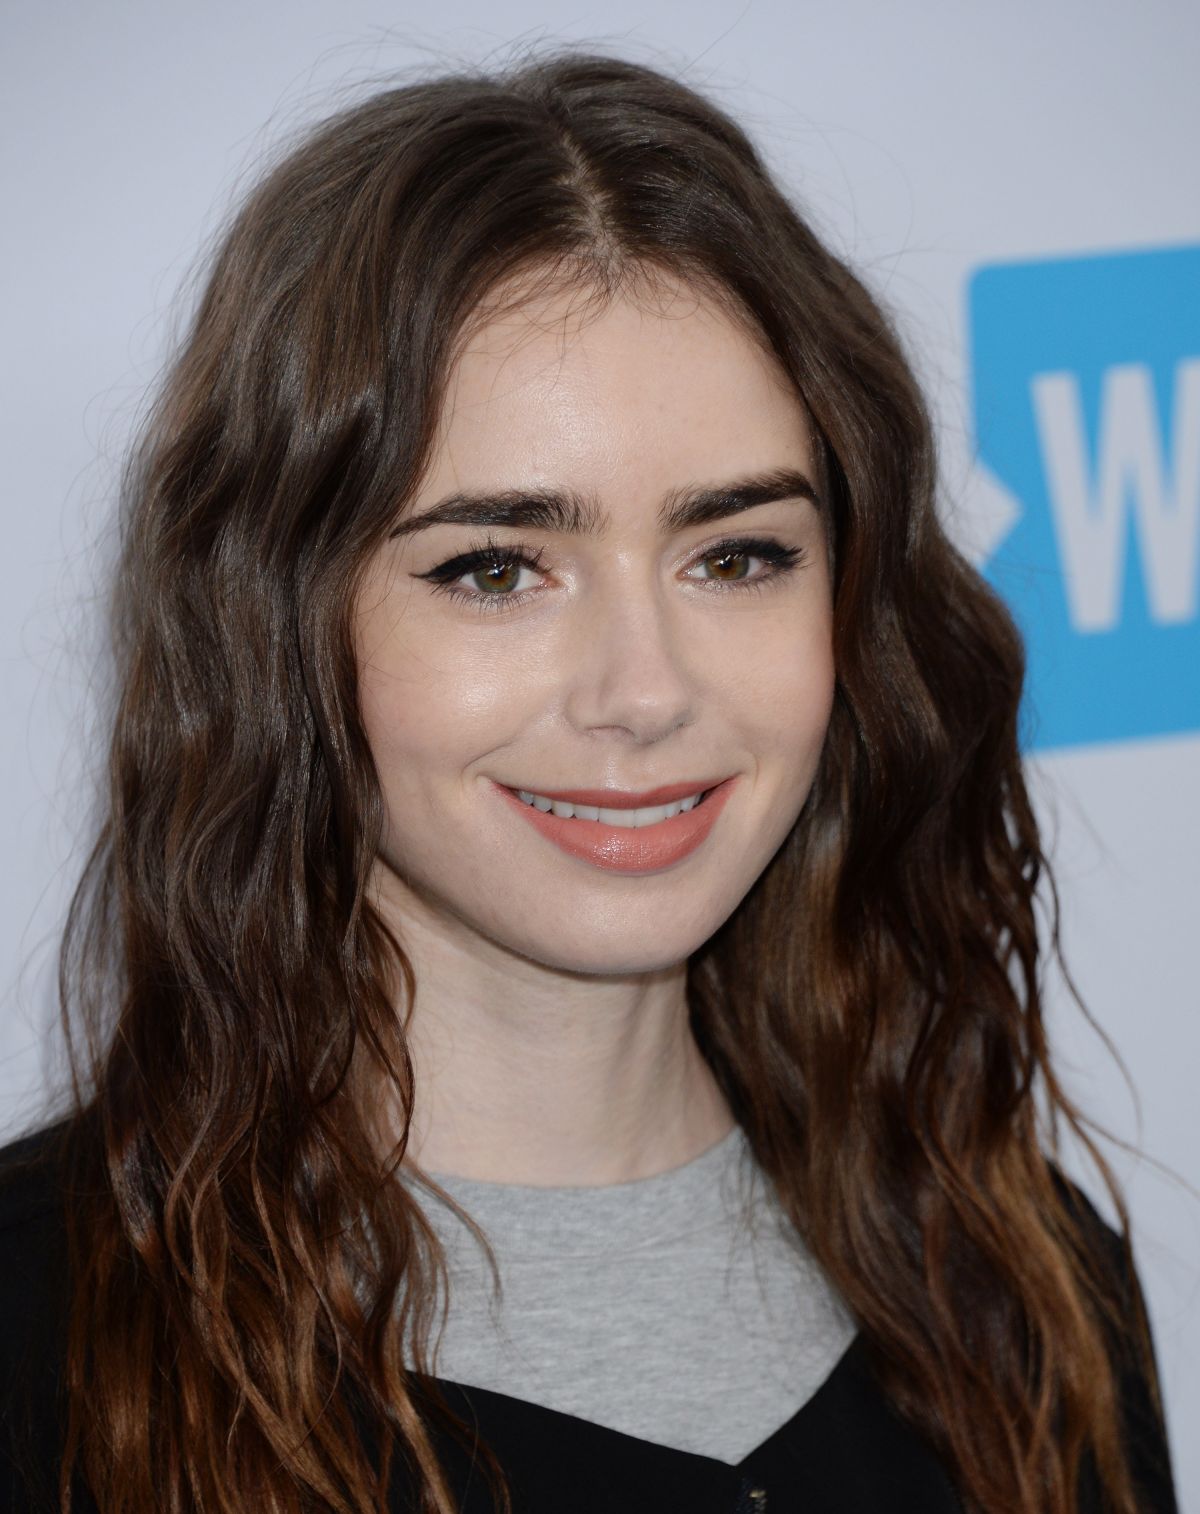 LILY COLLINS at WE Day California in Los Angeles 04/19/2018 – HawtCelebs